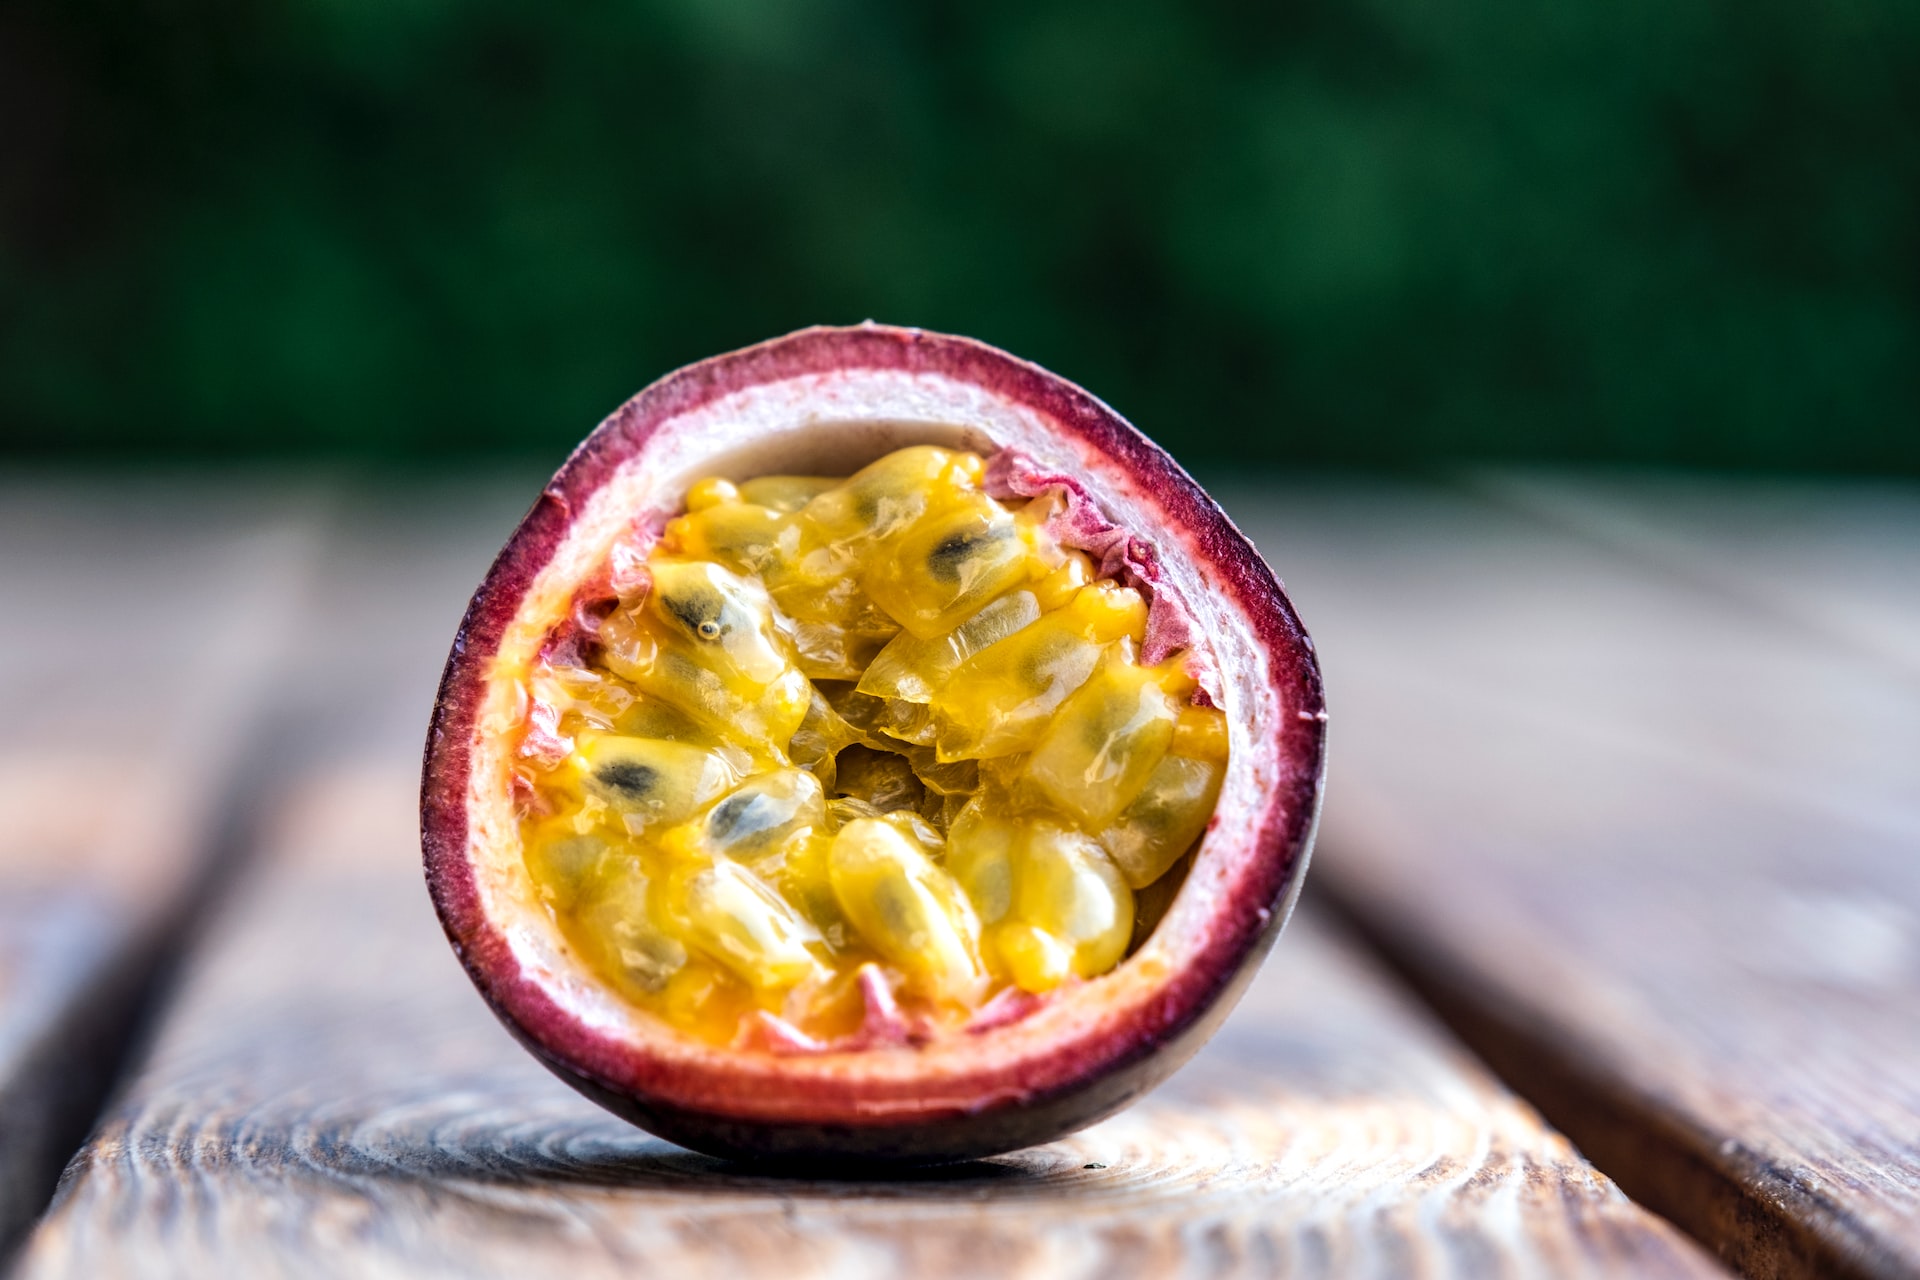 Passion Fruit: The Tropical Fruit That May Help Boost Your Health